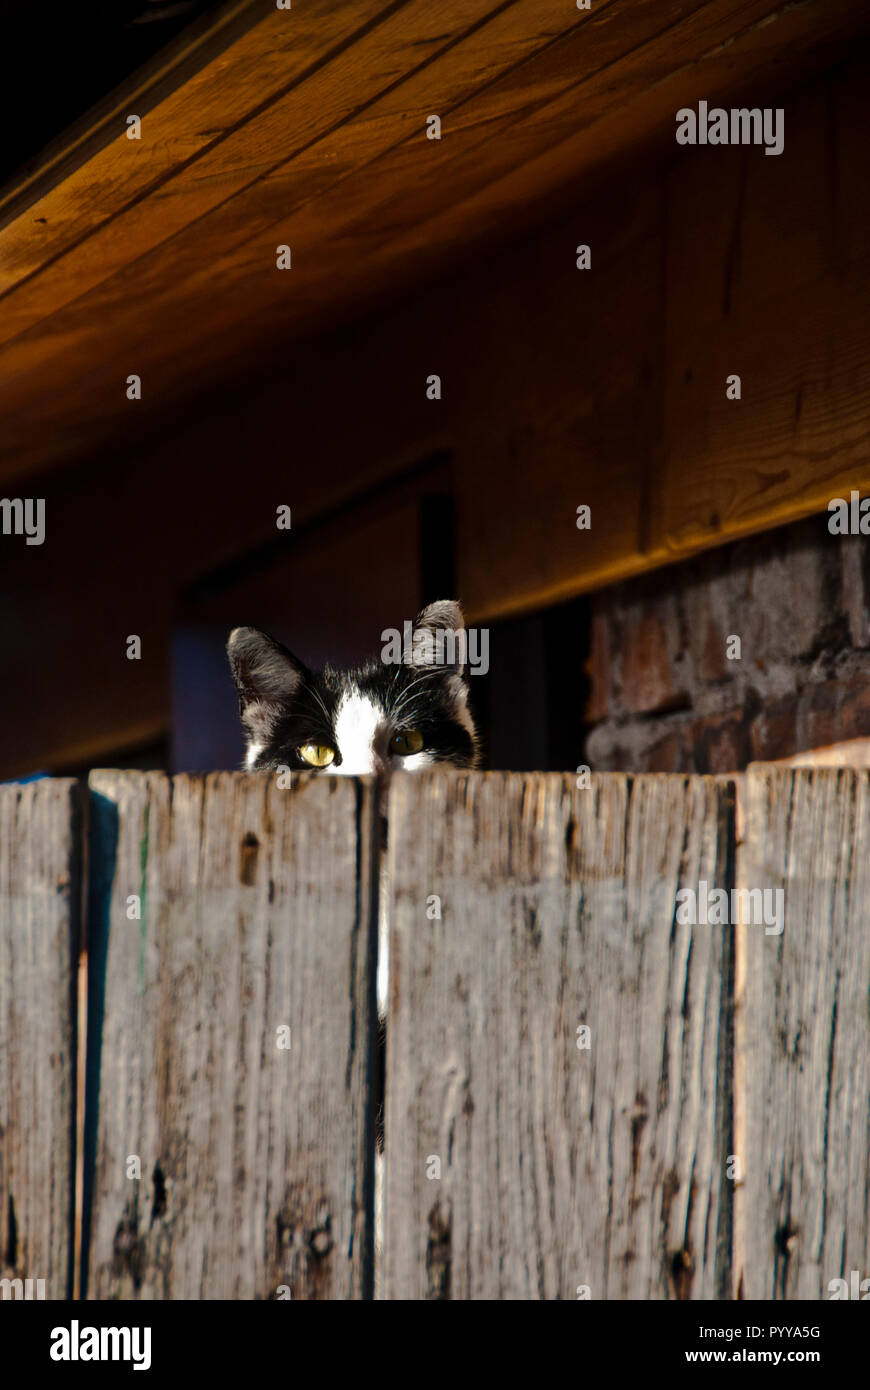 bicolor cat peeking from behind a wooden fence Stock Photo